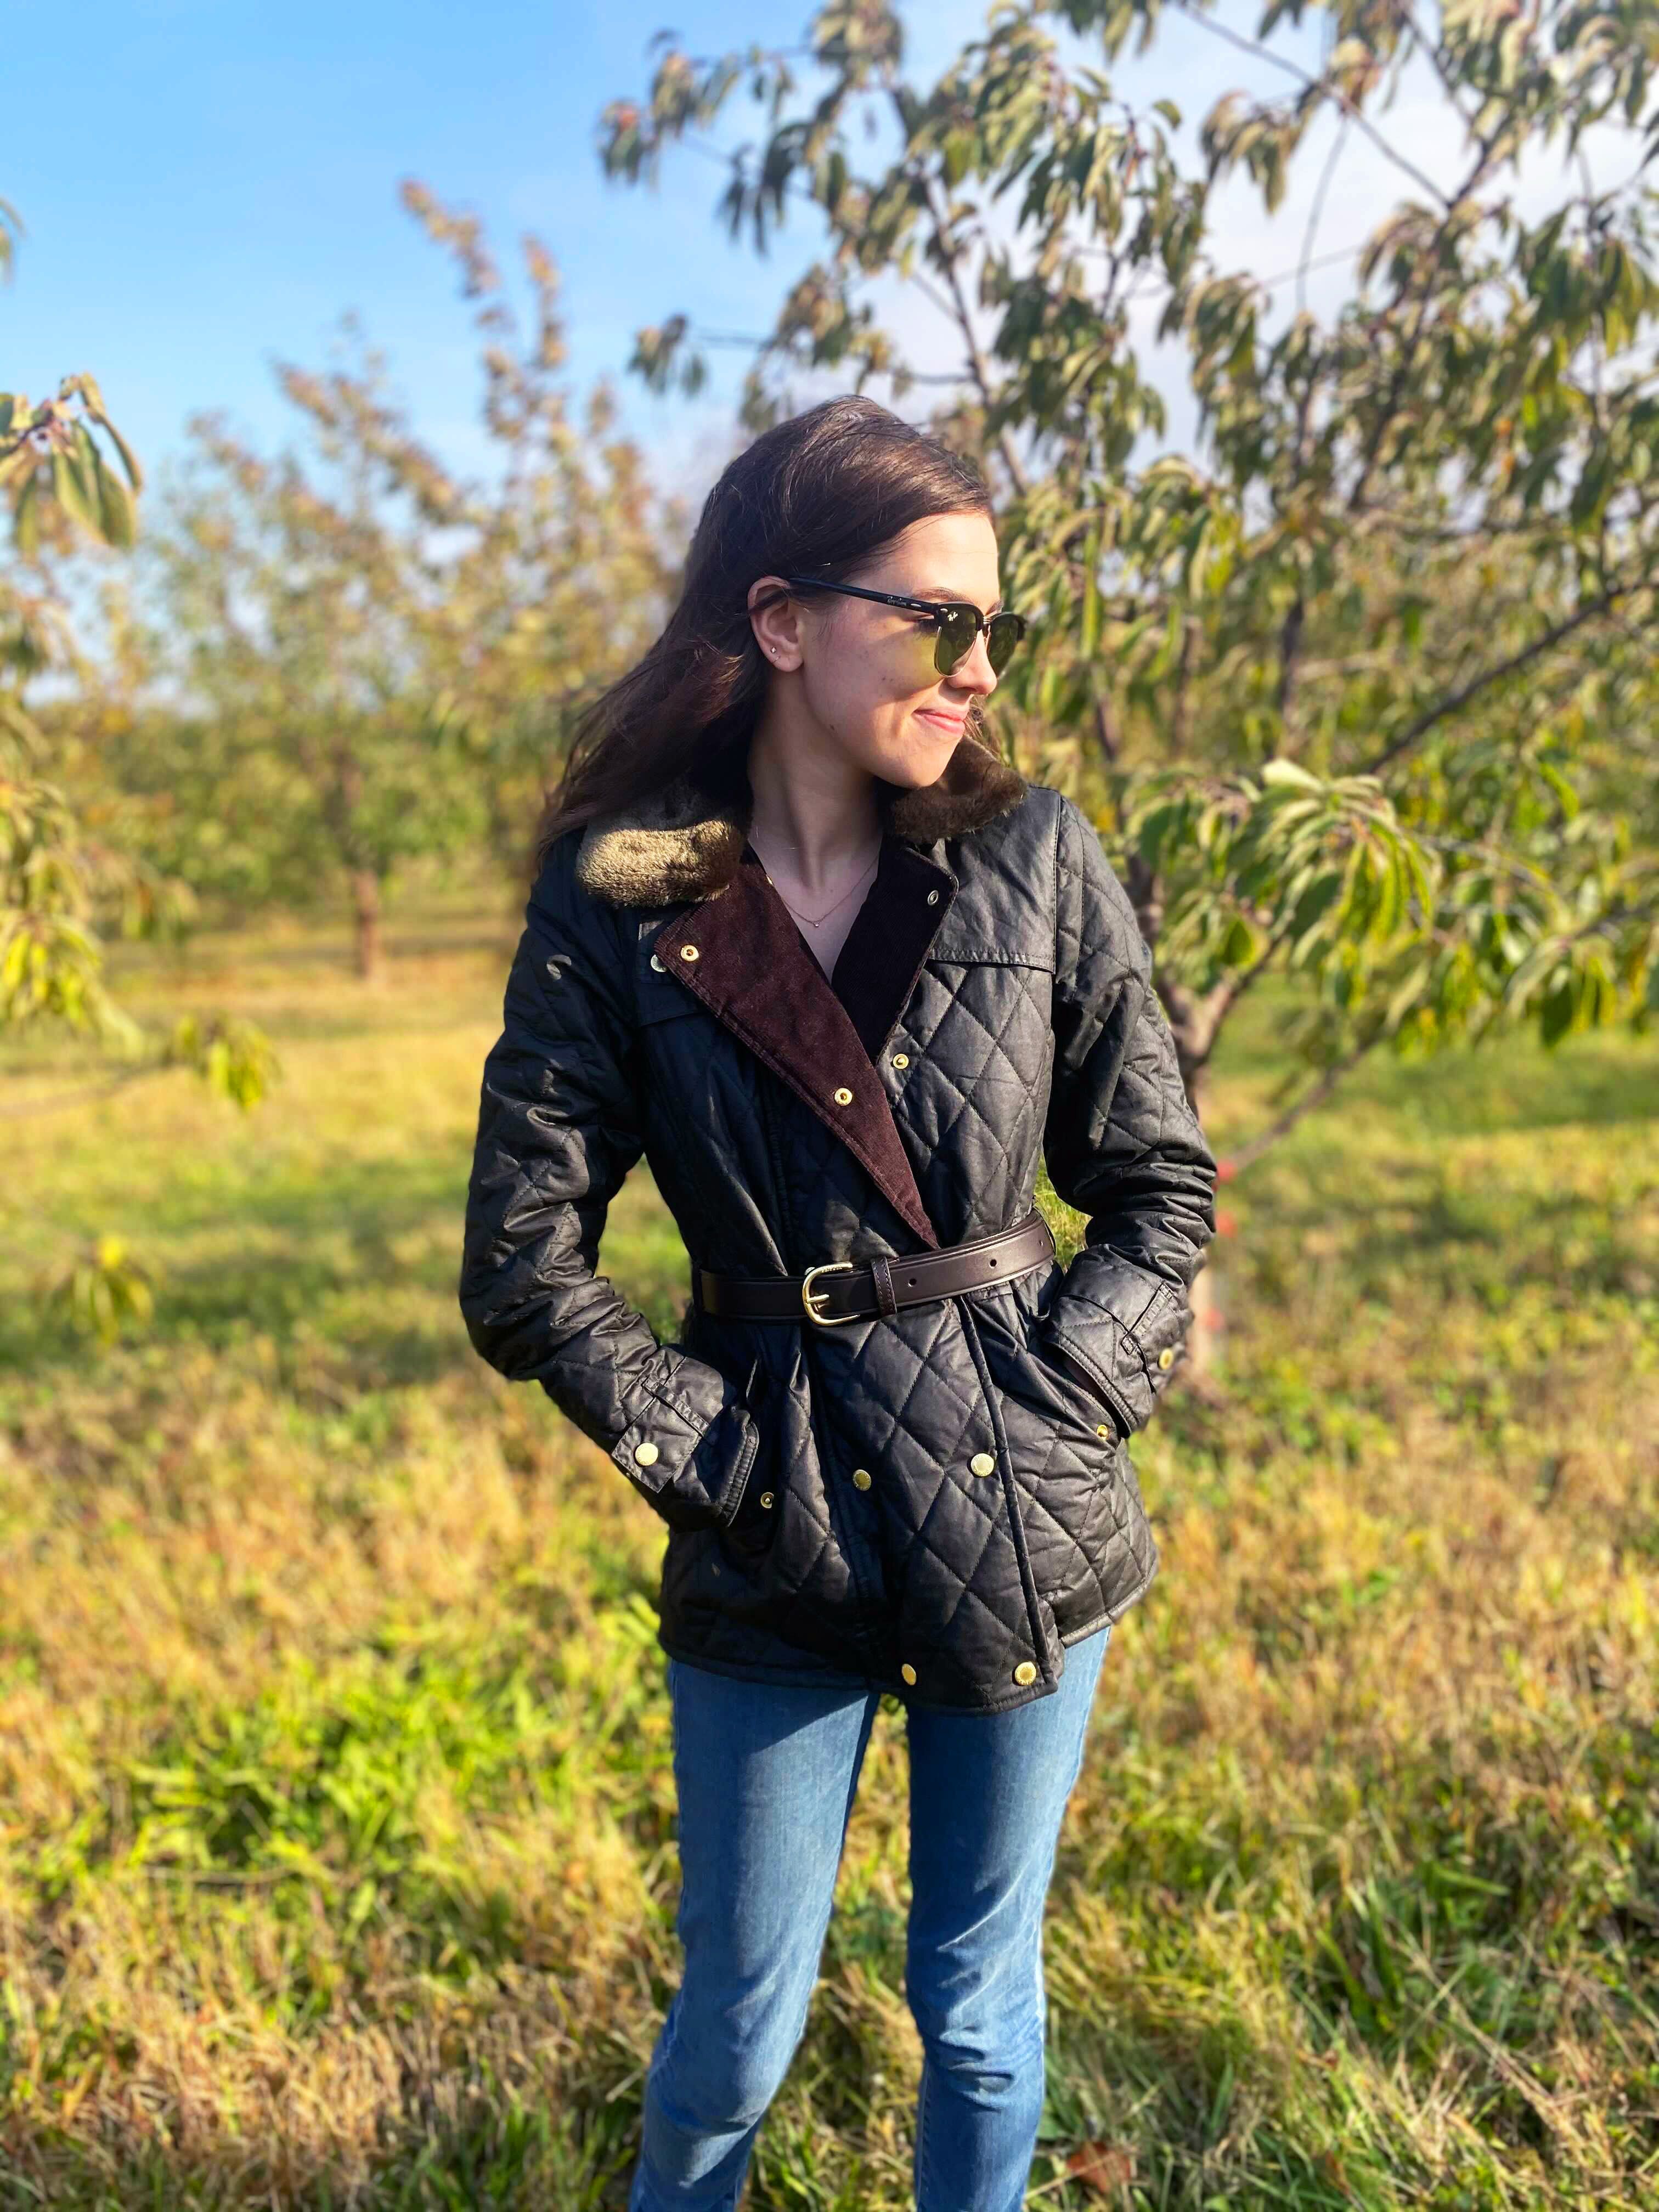 barbour wax jacket review